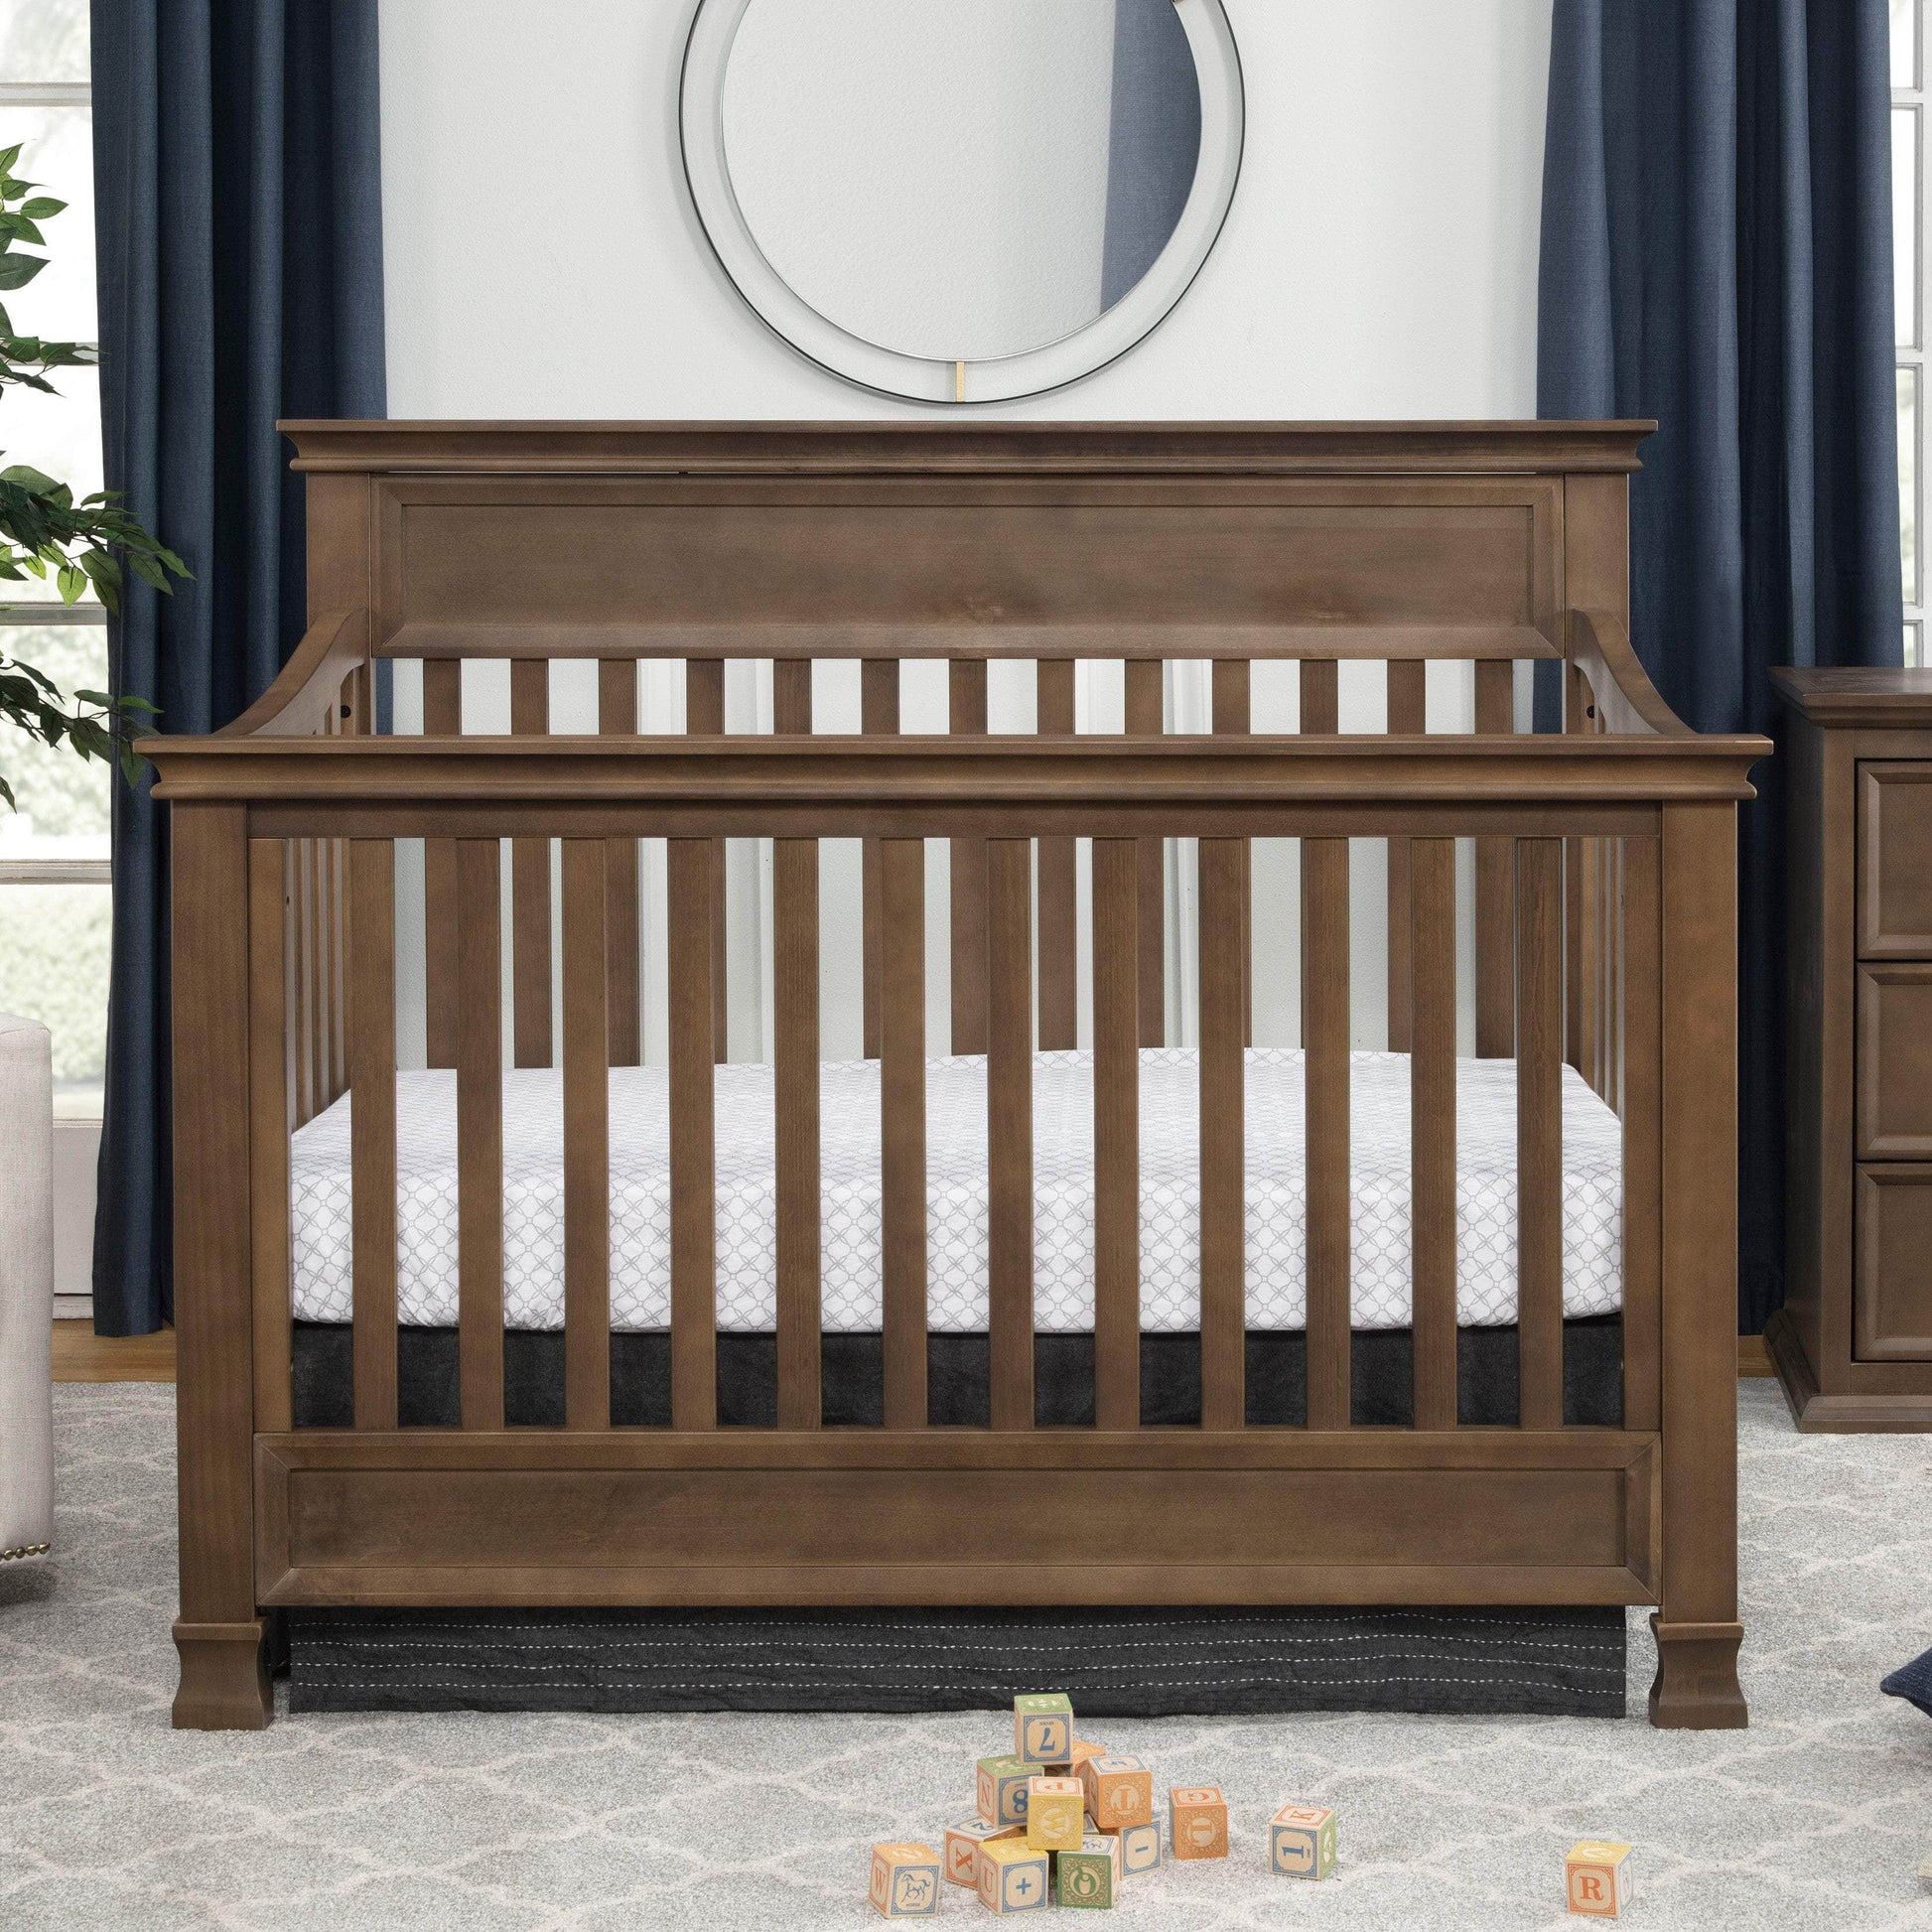 M3901MO,Foothill 4-in-1 Convertible Crib in Mocha